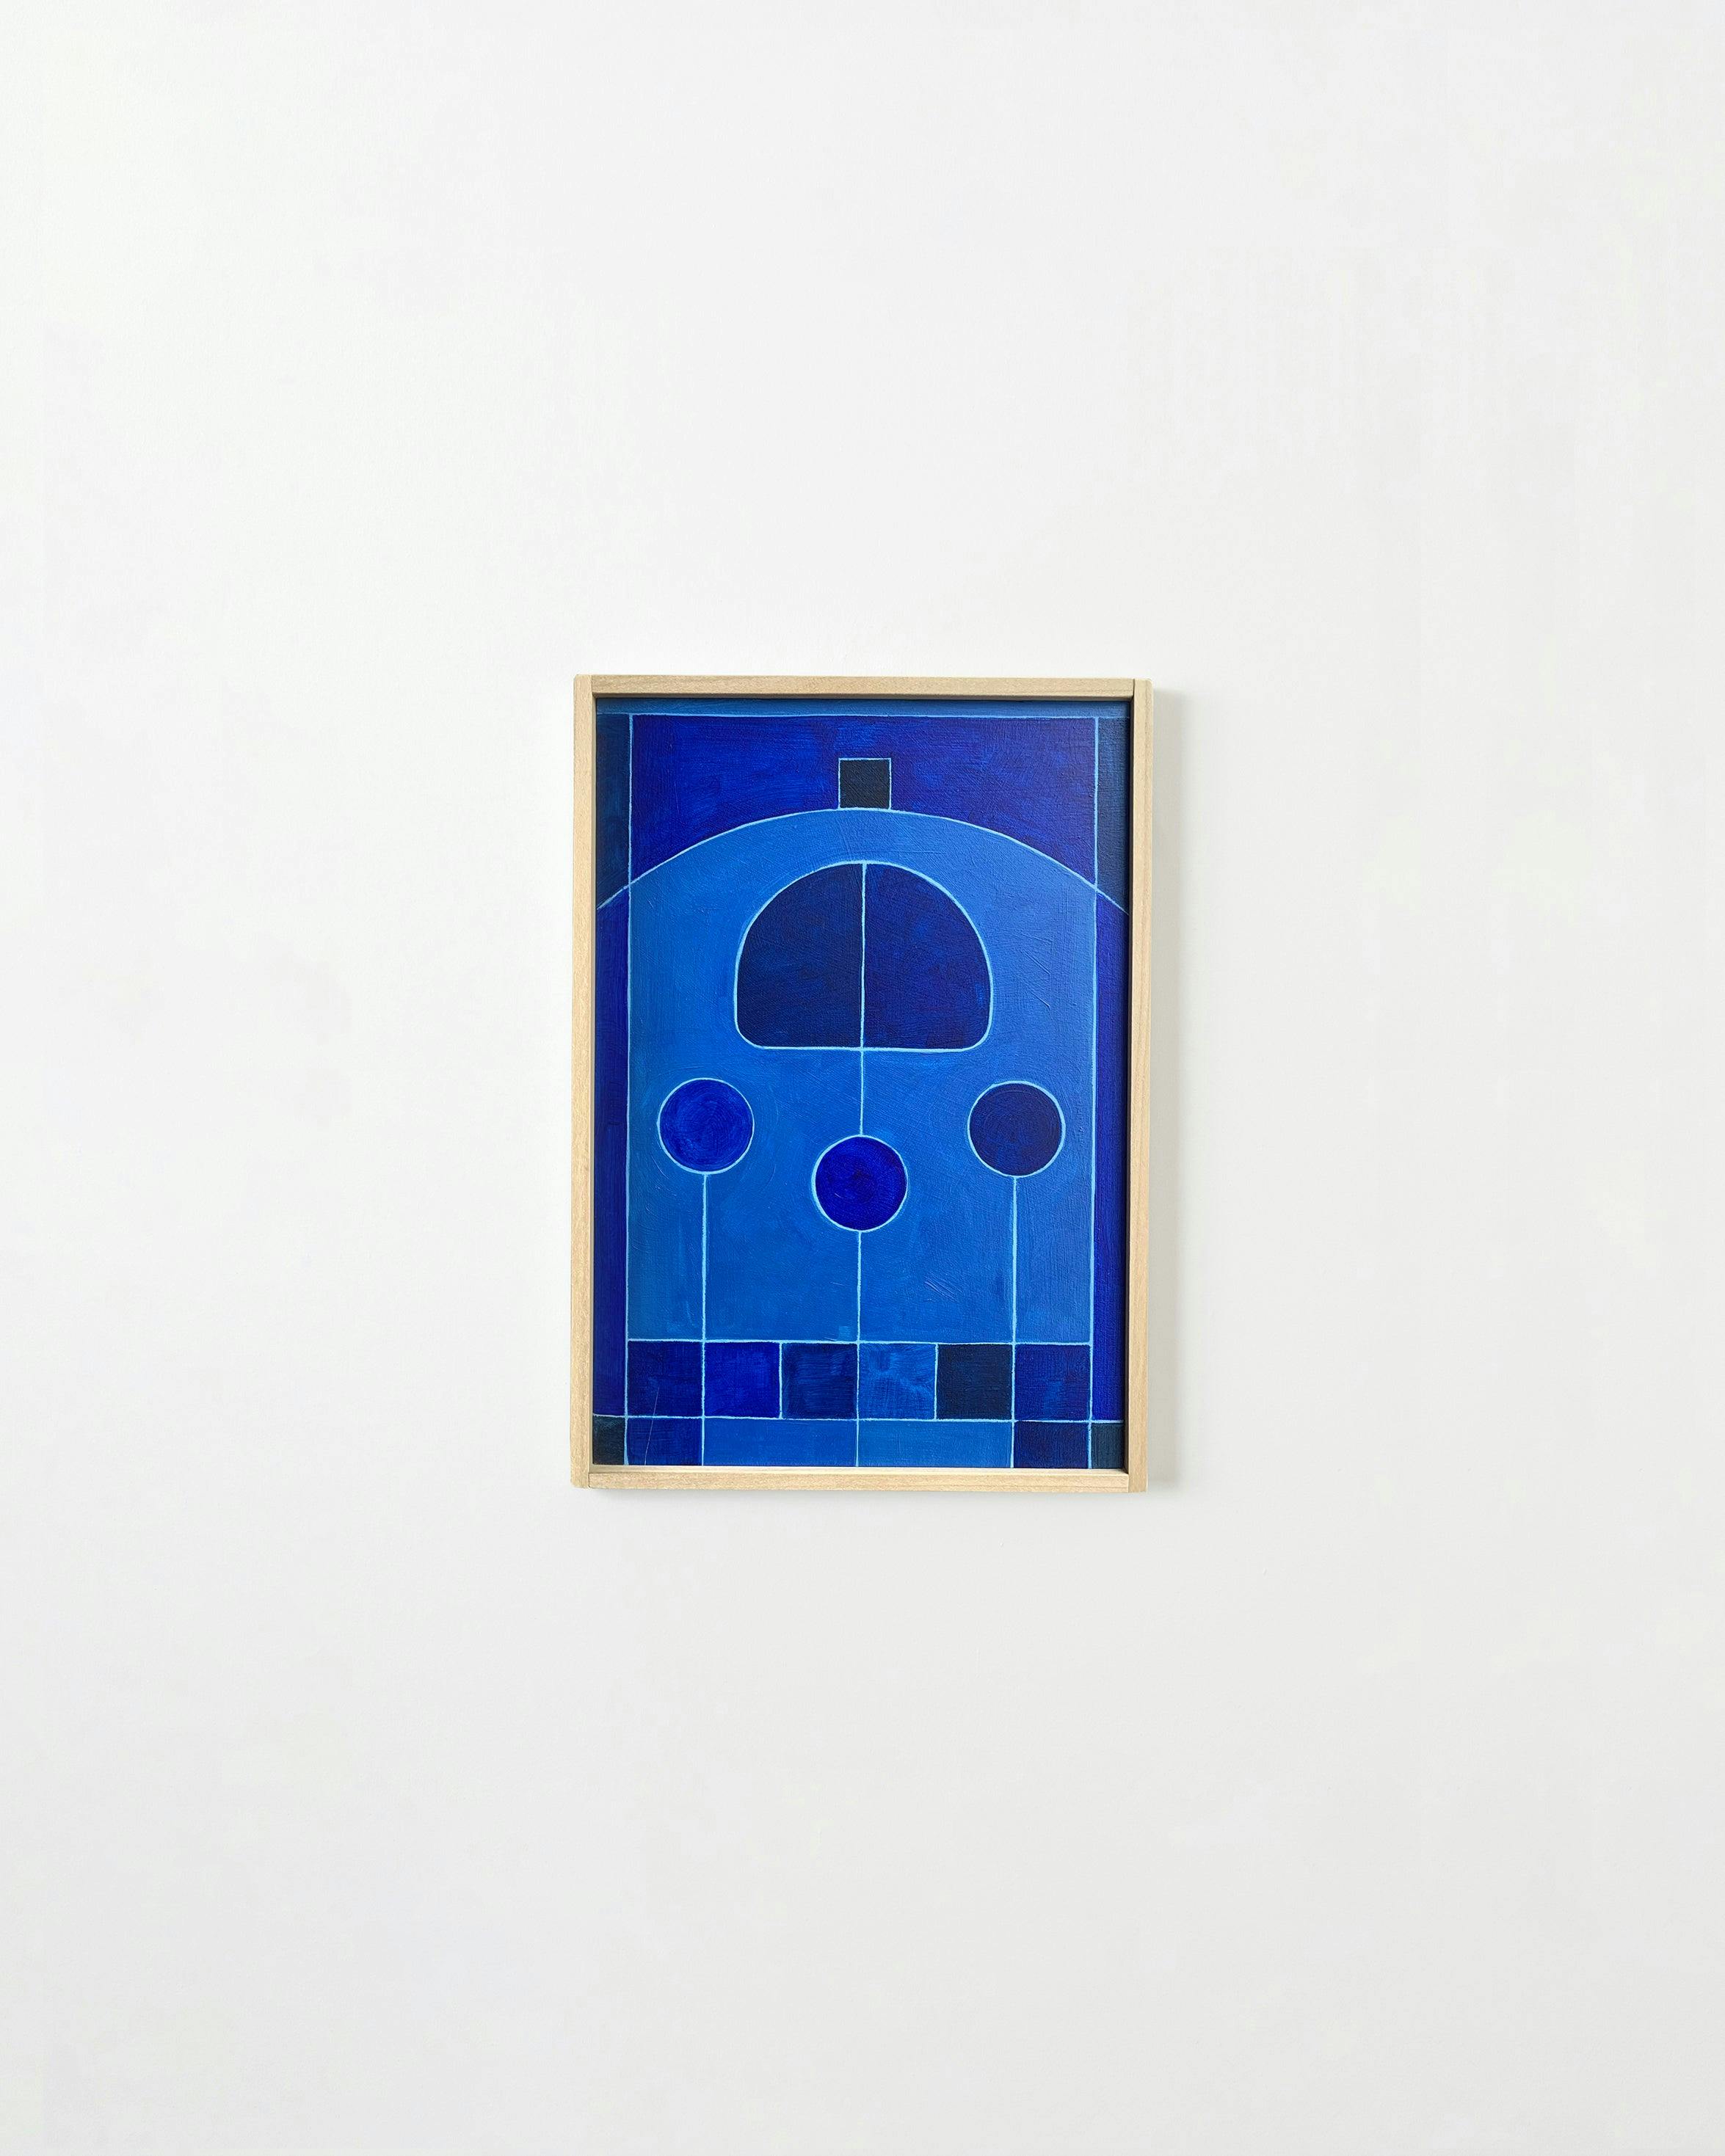 Painting by Carla Weeks titled "Stained Glass Study in Blue 3".